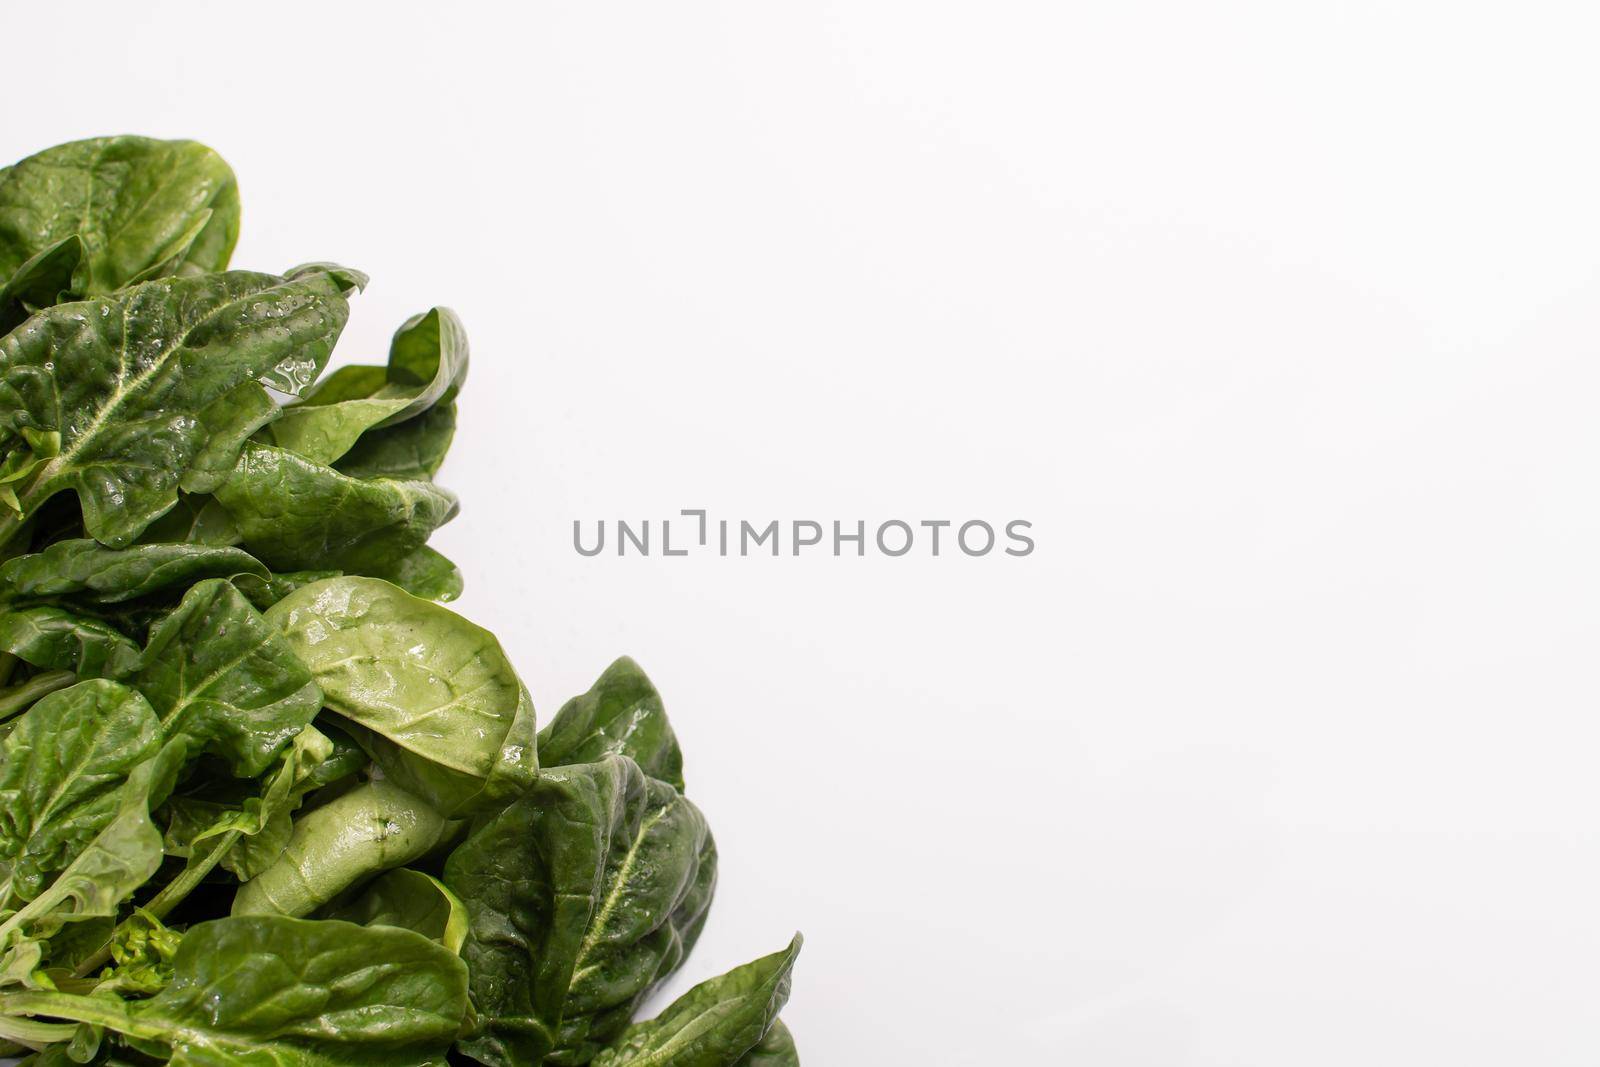 Spinach close-up on a white background. Food for vegans and vegetarians. copy space